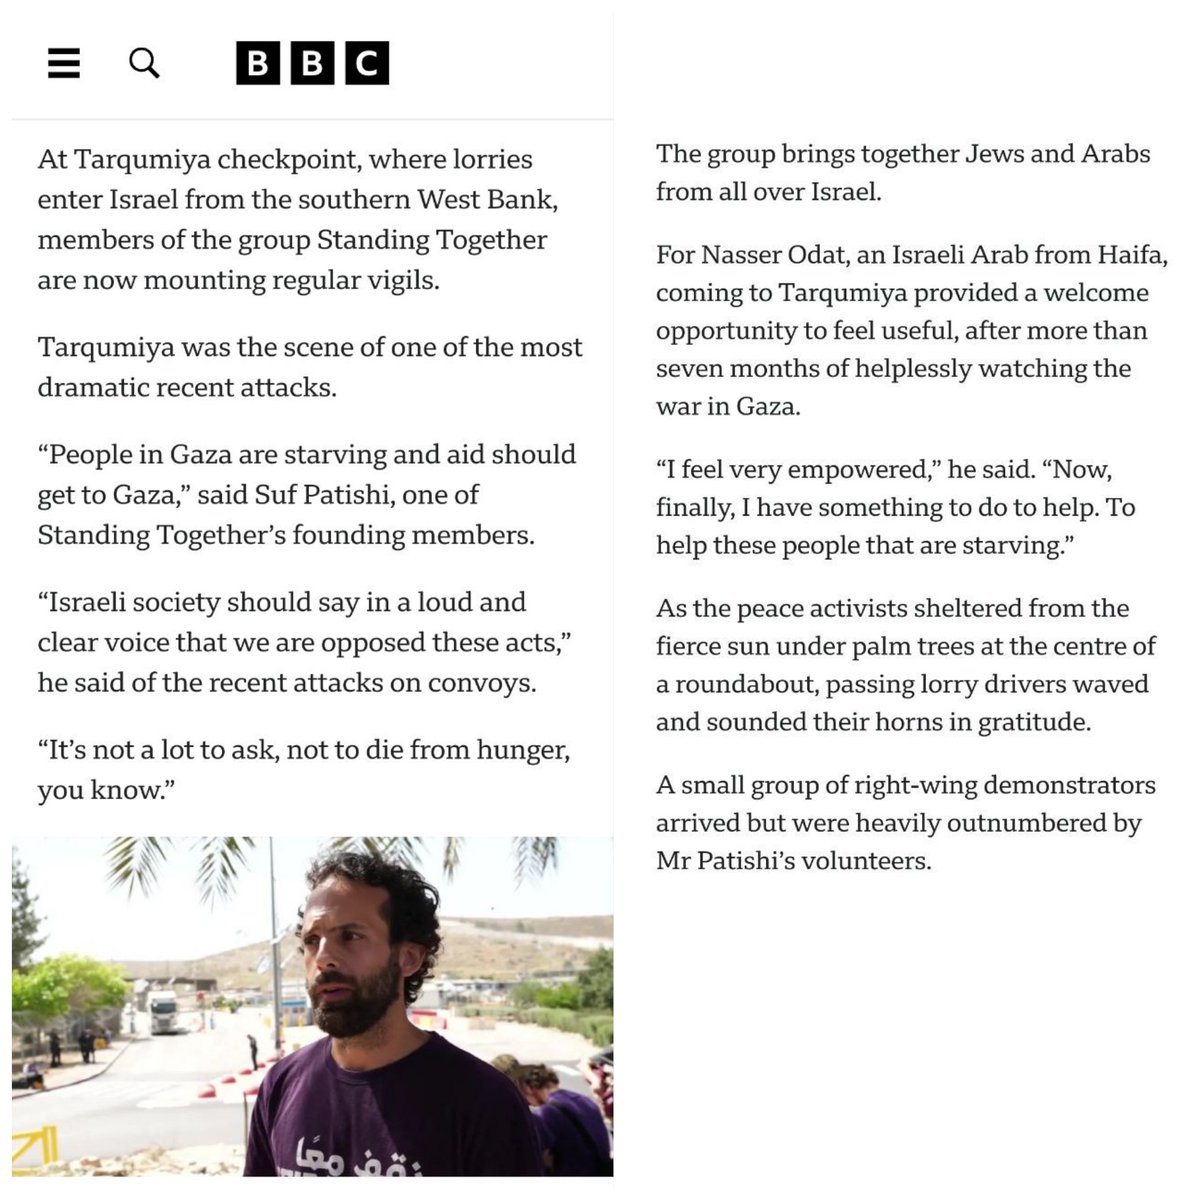 The BBC reports: We initiated the Humanitarian Guard to daily bring dozens of activists from Israel, both Jews & Arab-Palestinians, to Tarqumiya checkpoint, and defend the aid trucks carrying food to Gaza from Far-Right attackers. Support this effort: my.israelgives.org/en/fundme/aidp… 🟣